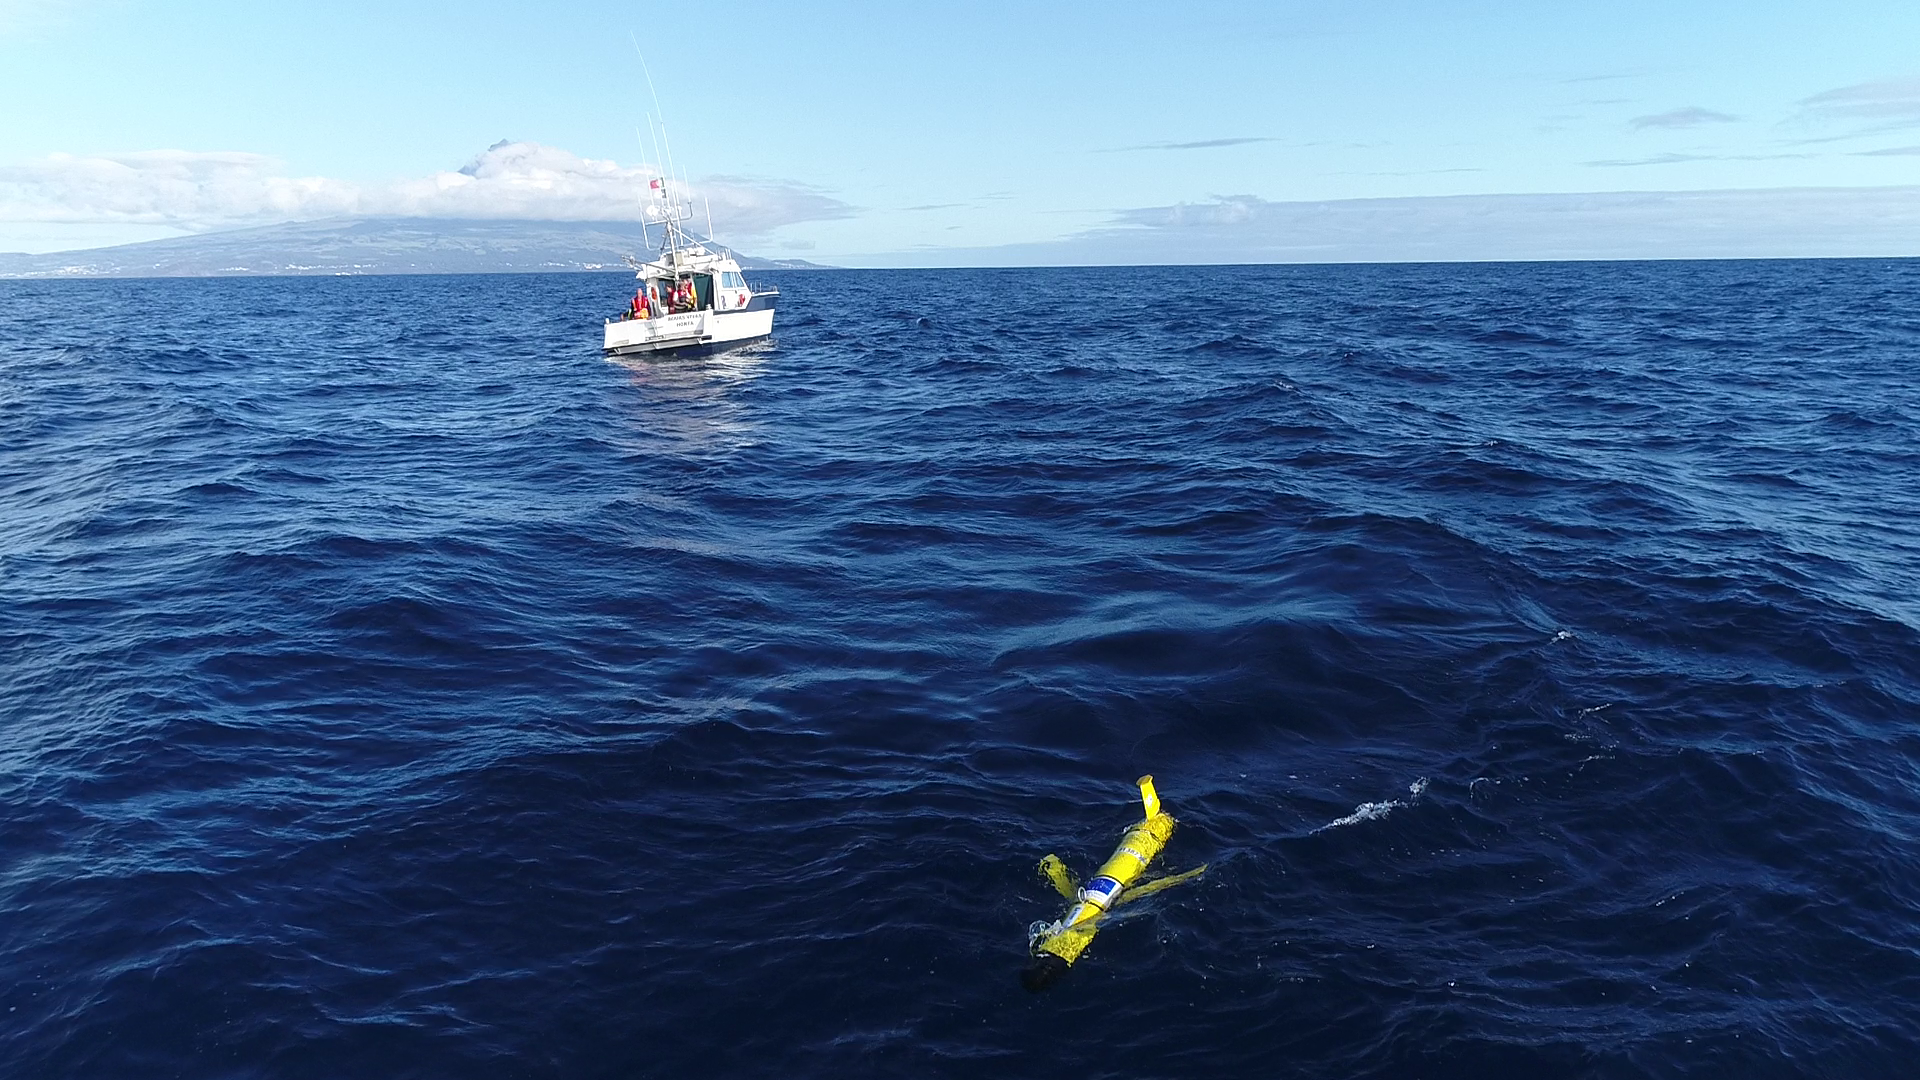 slocum launch during the IFADO meeting, Azores, October 23, 2019